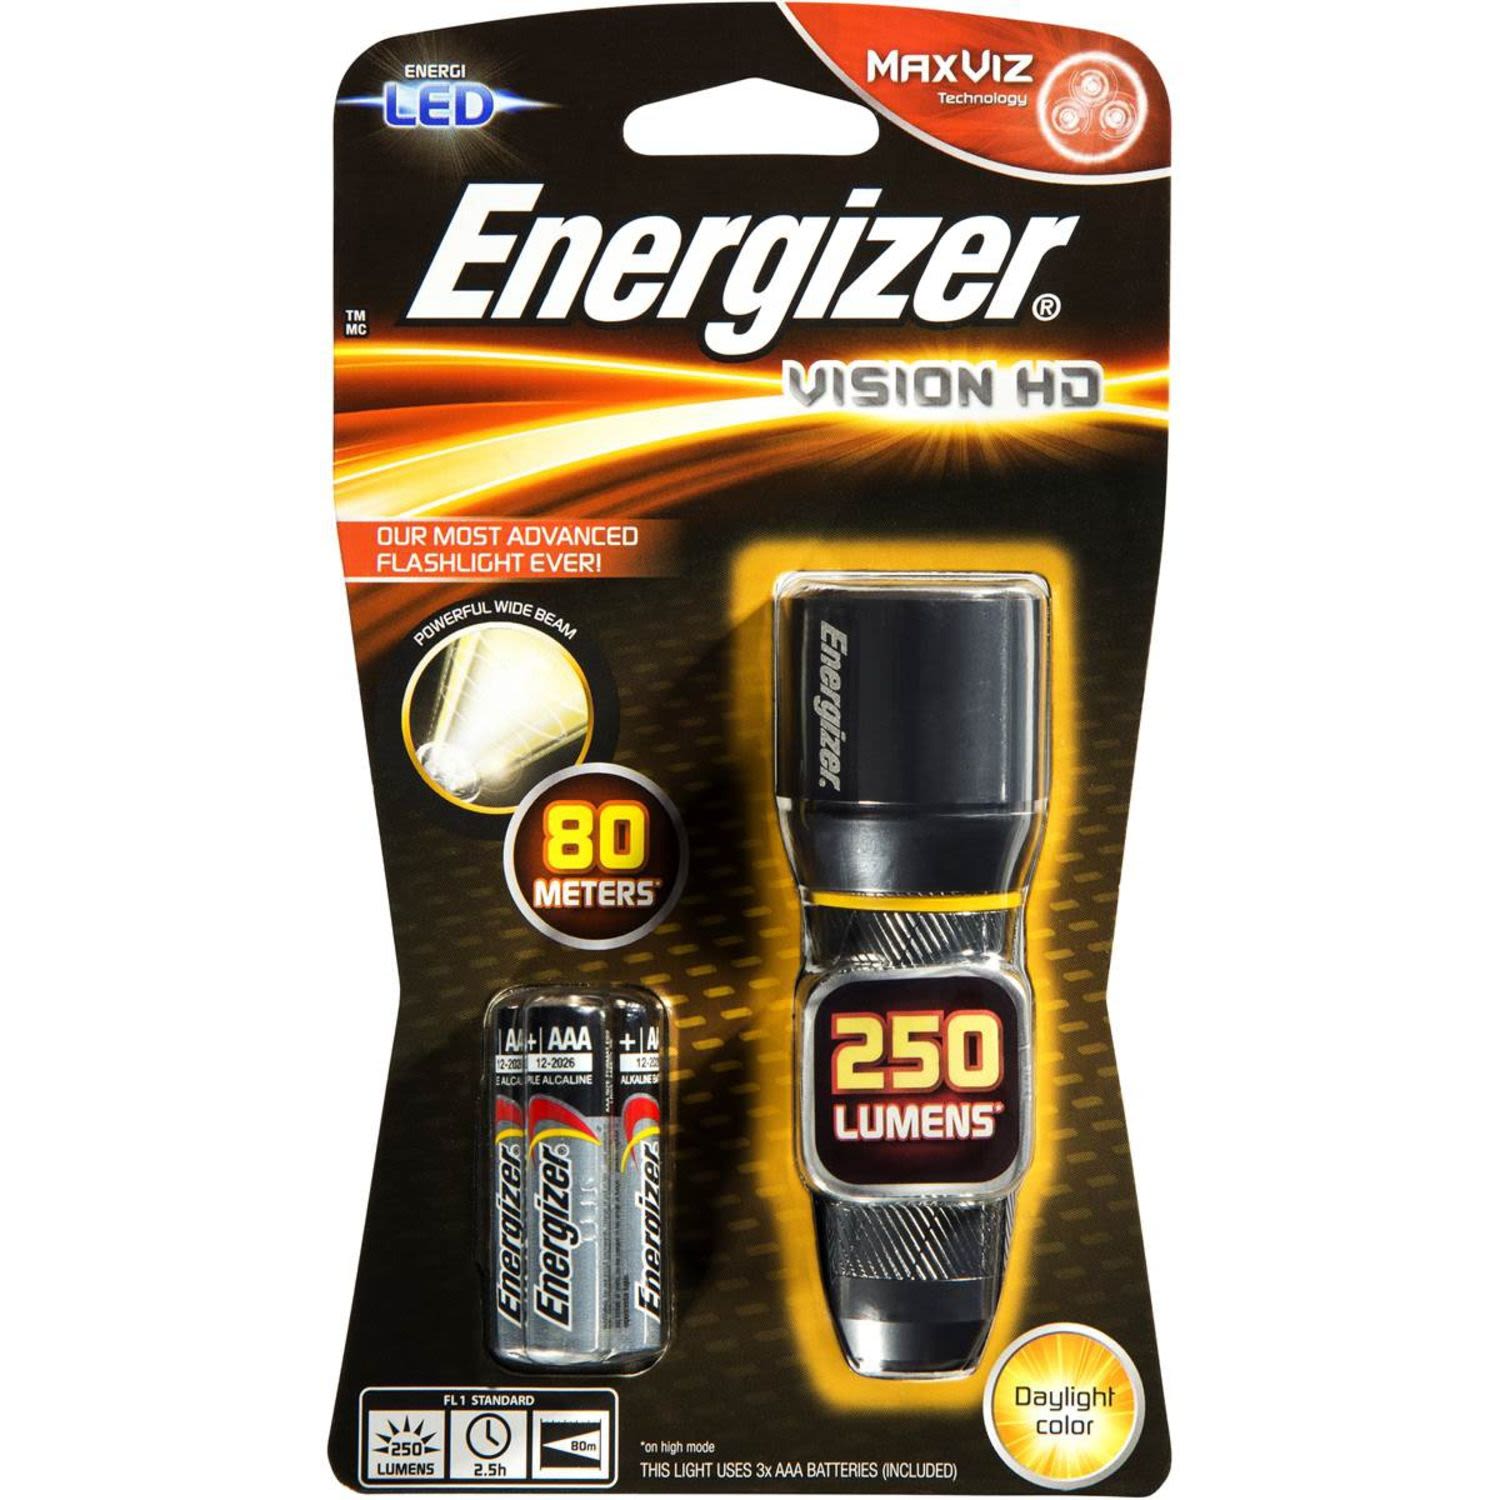 Energizer Vision HD Performance 3 AAA Torch, 1 Each